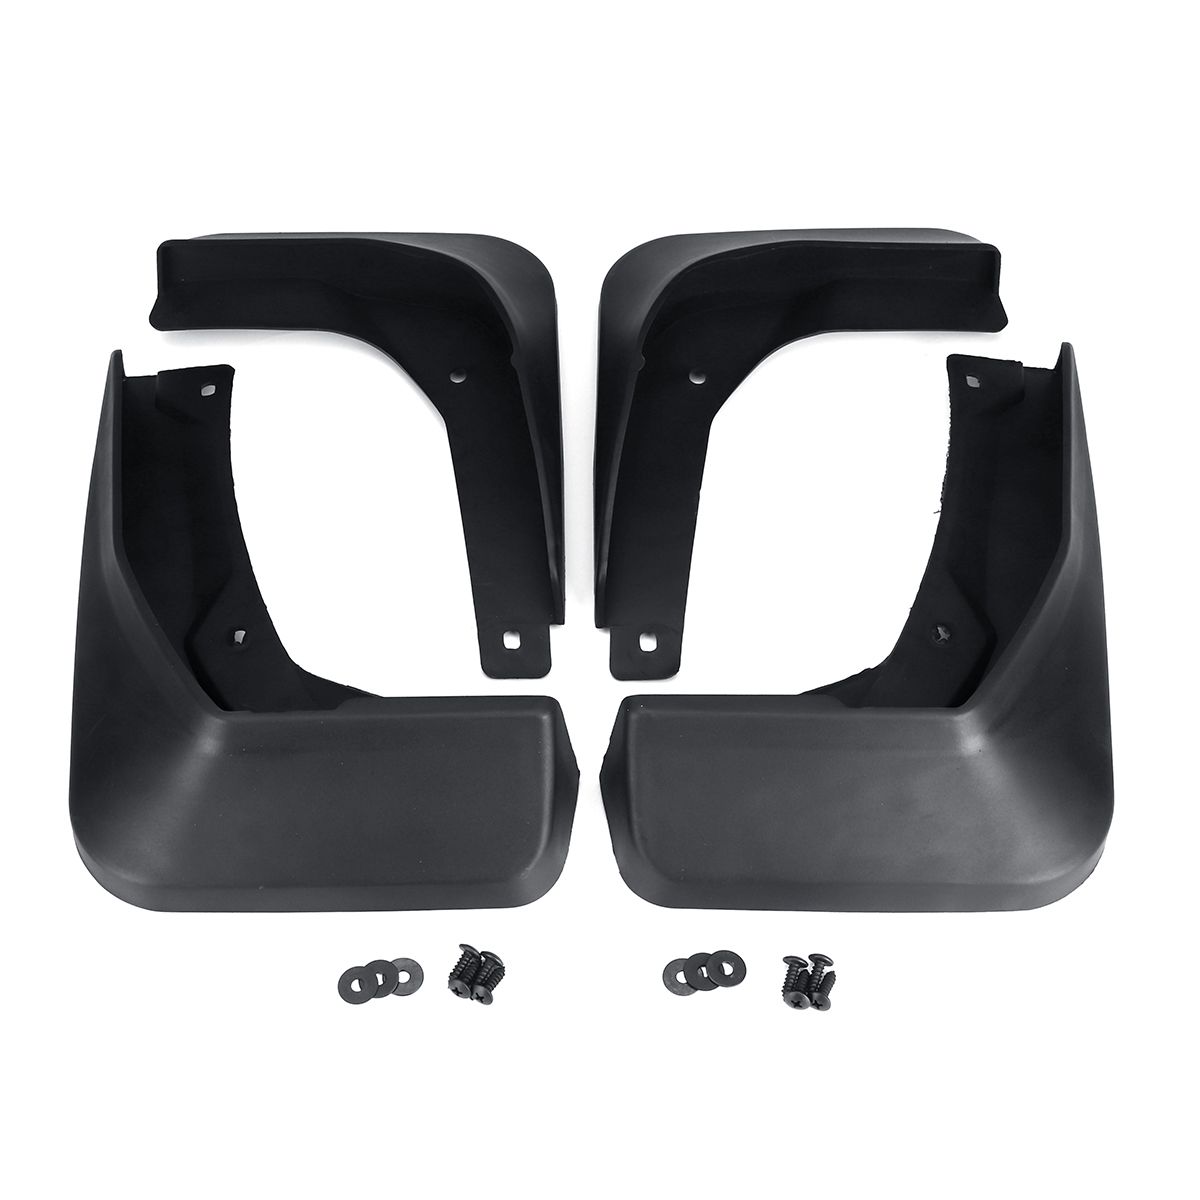 Front-And-Rear-Mud-Flaps-Car-Mudguards-For-Touran-VW-2016-2018-1406567